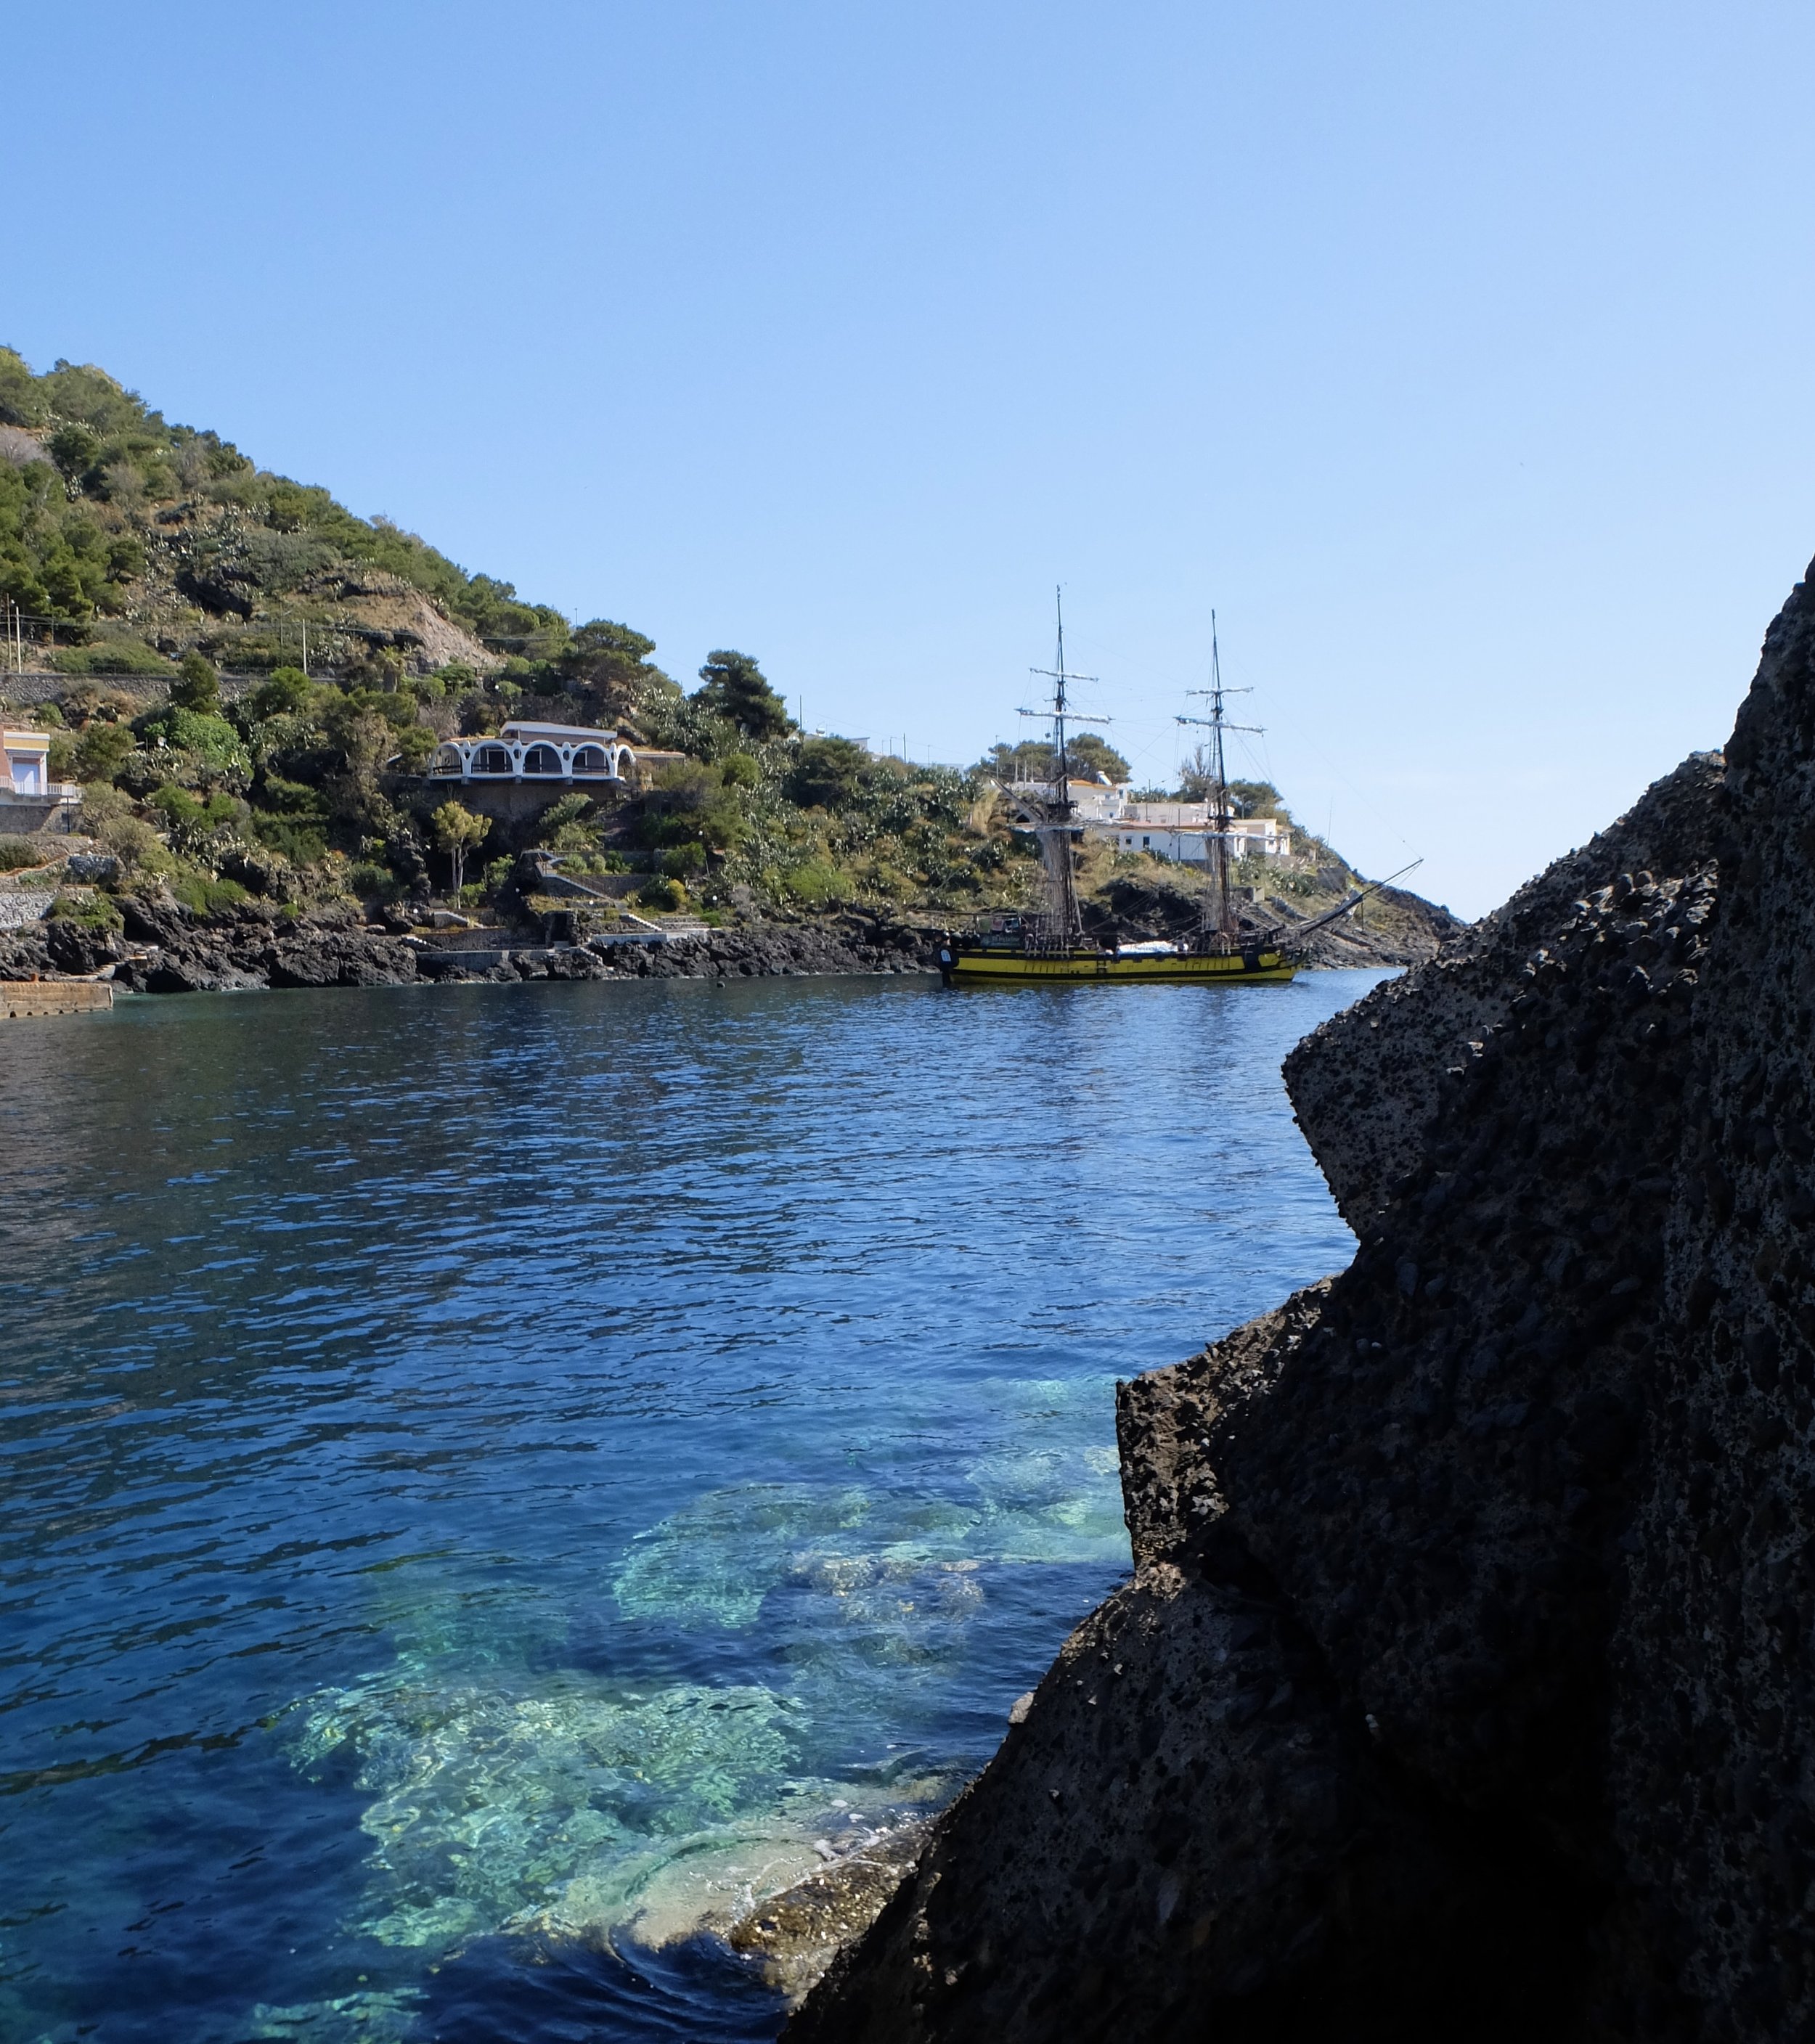  Things to do in Ustica.  Swim or dive in the crystal clear waters. 